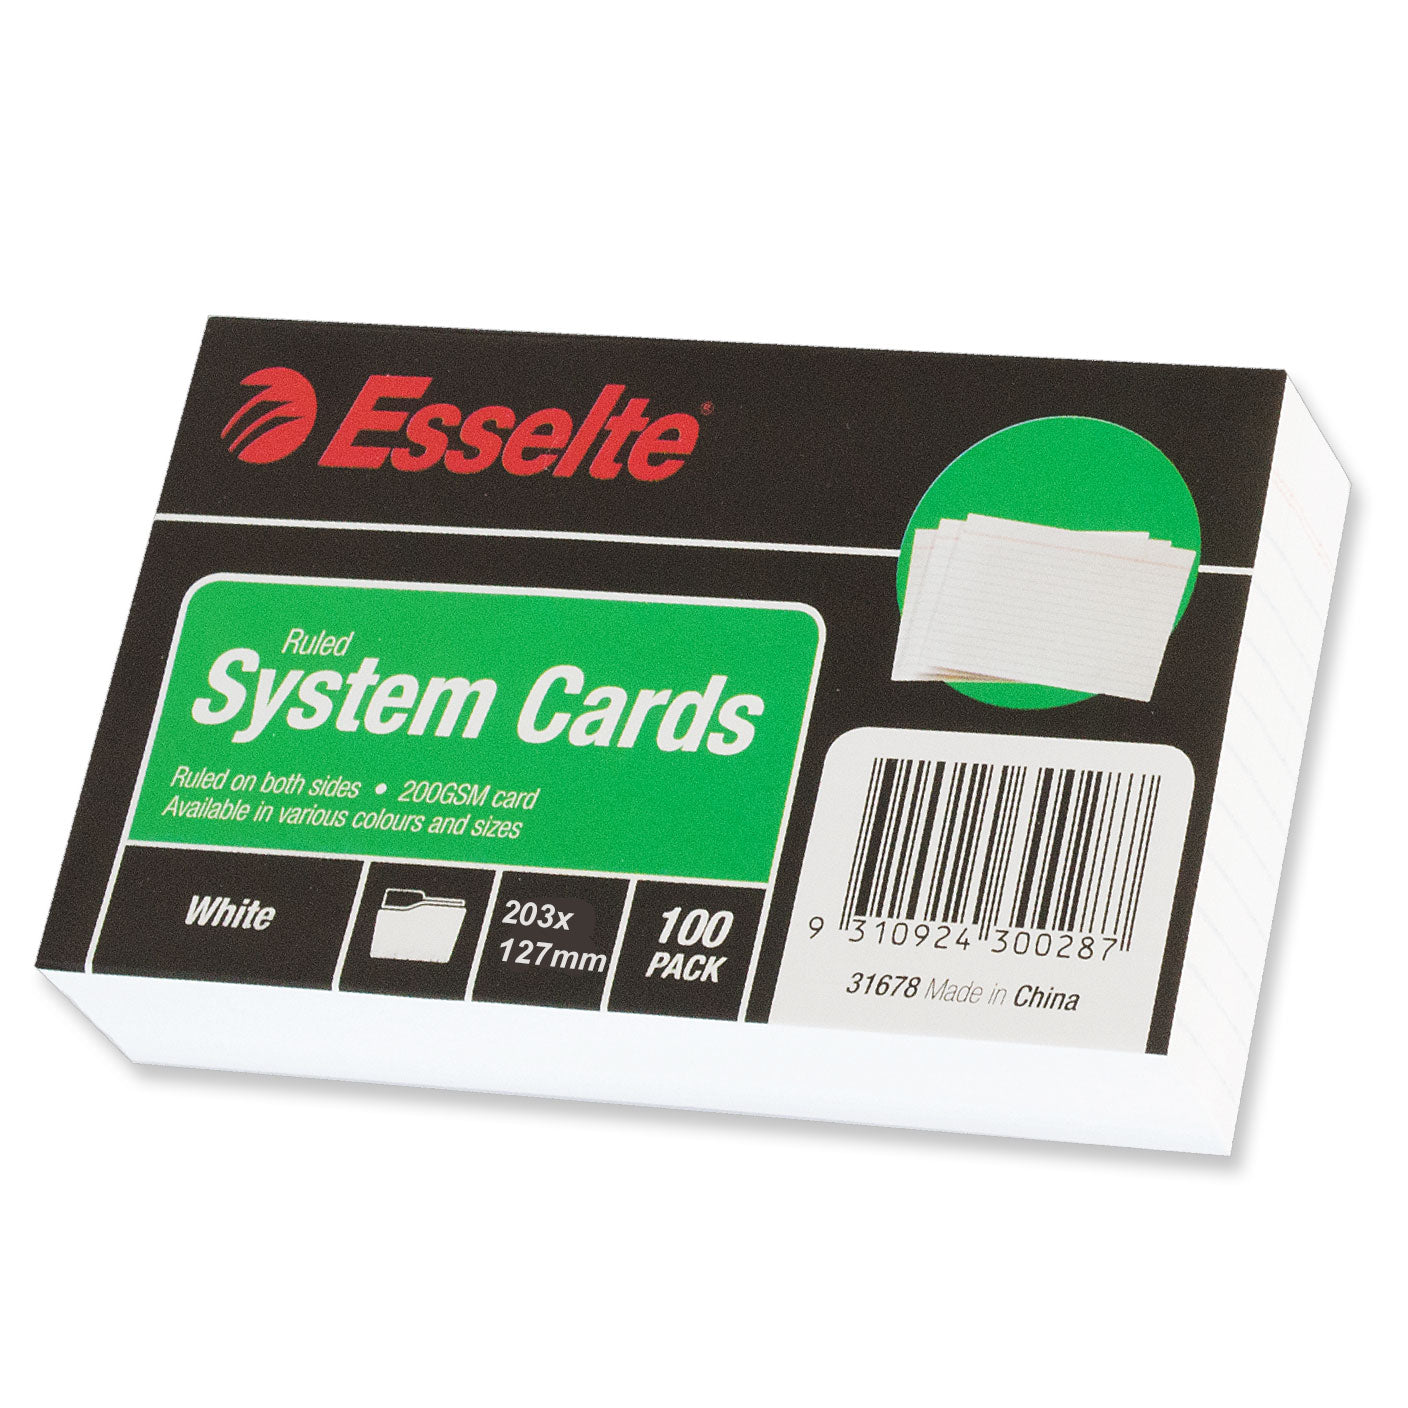 Esselte System Cards 203 x 127 mm White Pack 100